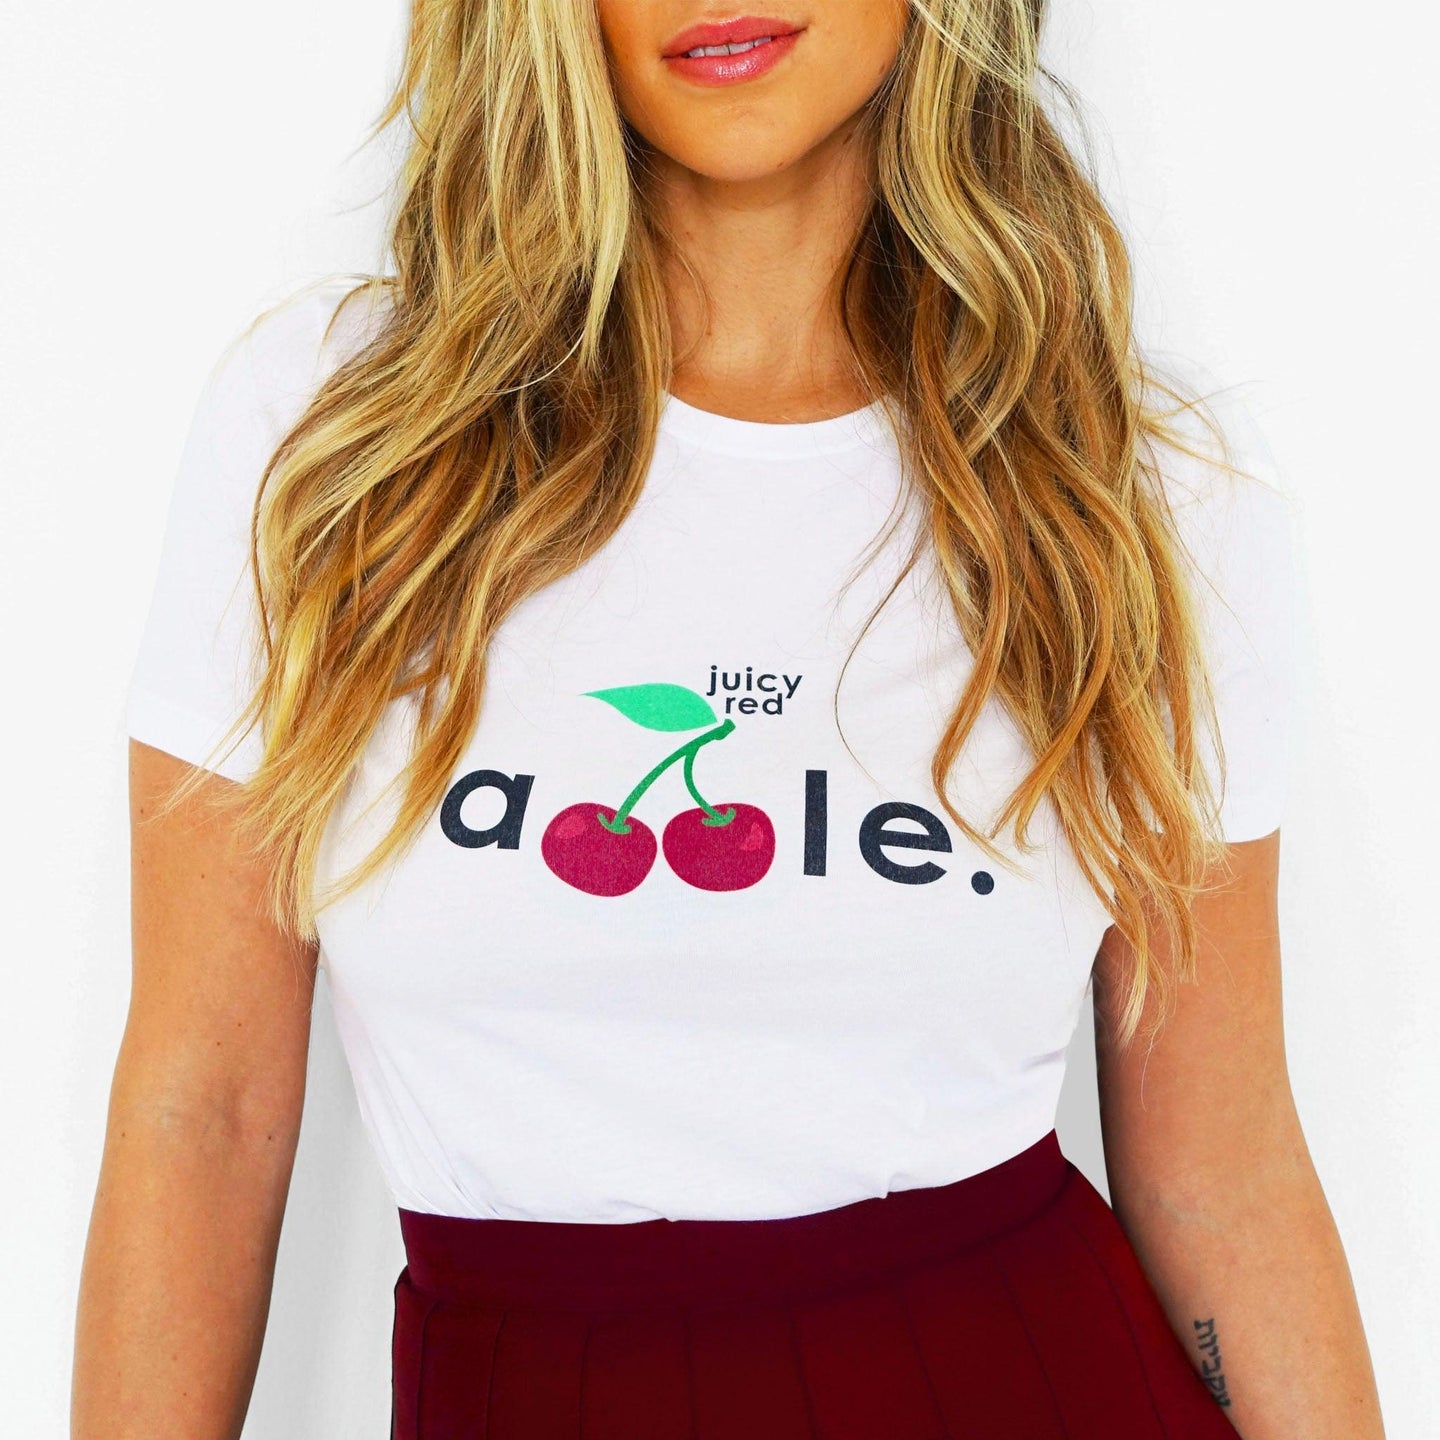 A Juicy. Red. Apple: White Graphic Tees - Designberries 